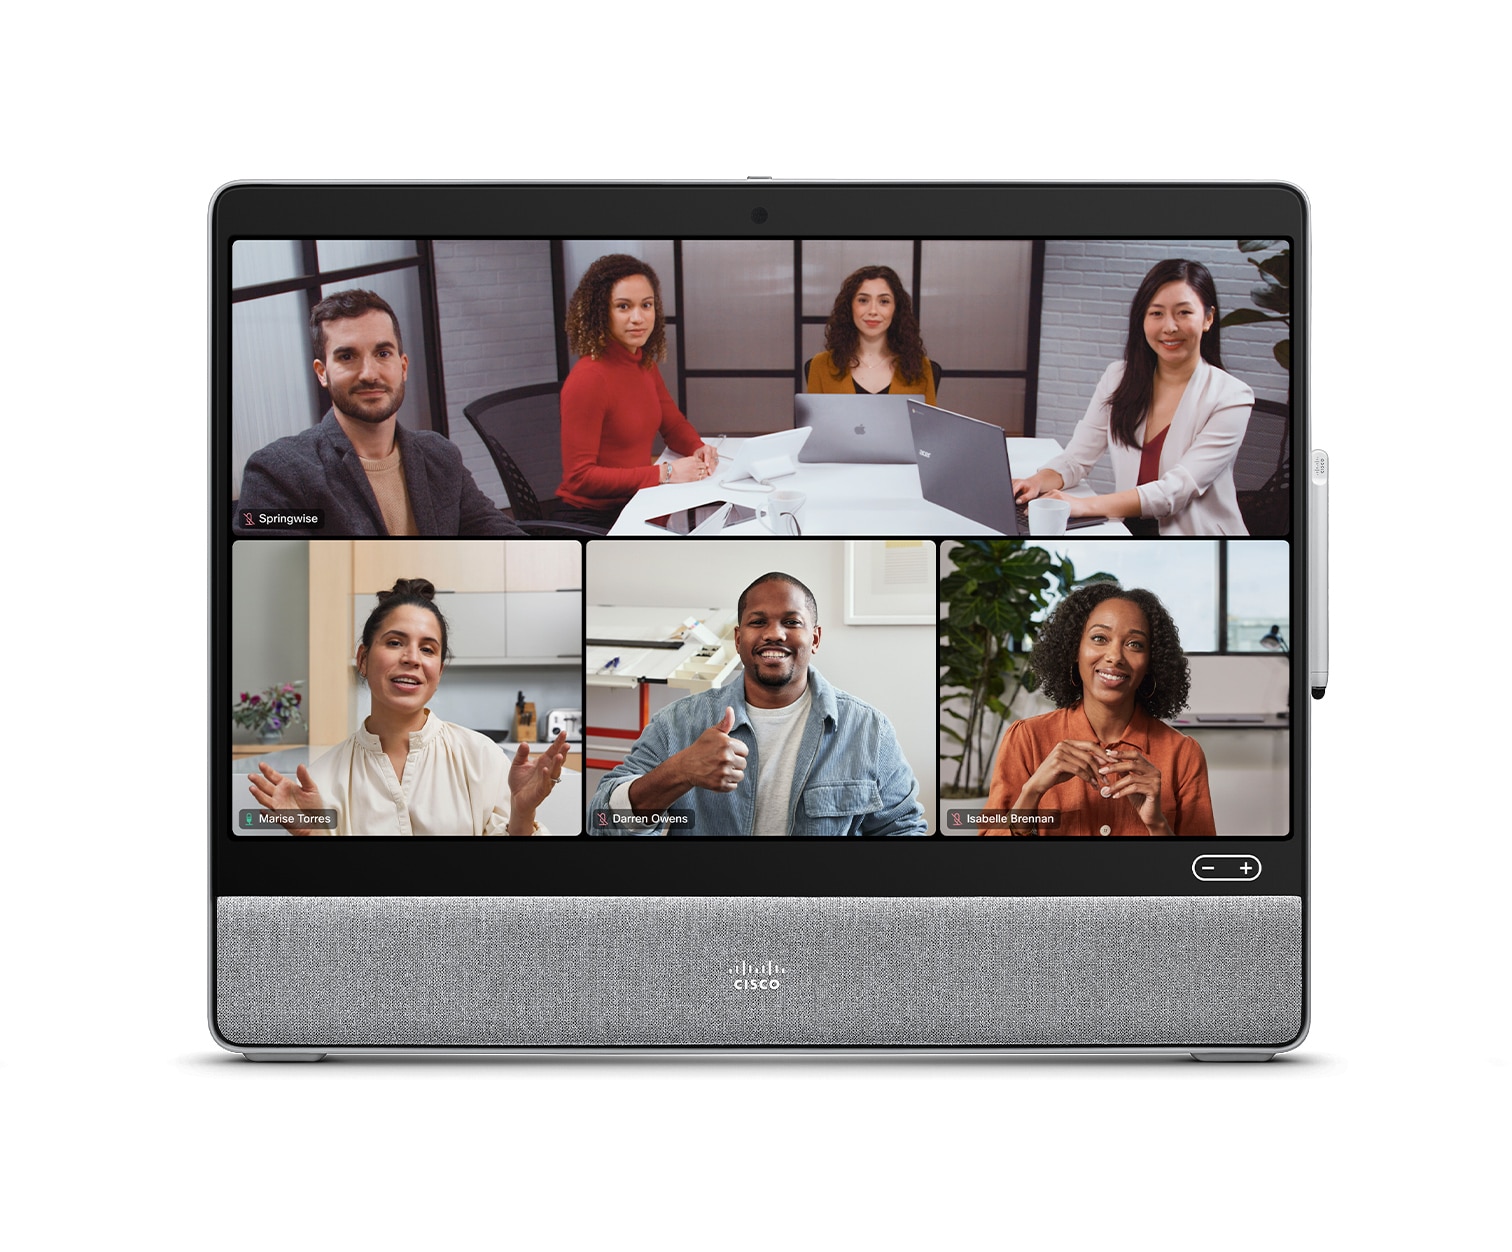 People Focus view on Cisco Desk device with Webex meeting platform and 4 people selected for video conference.